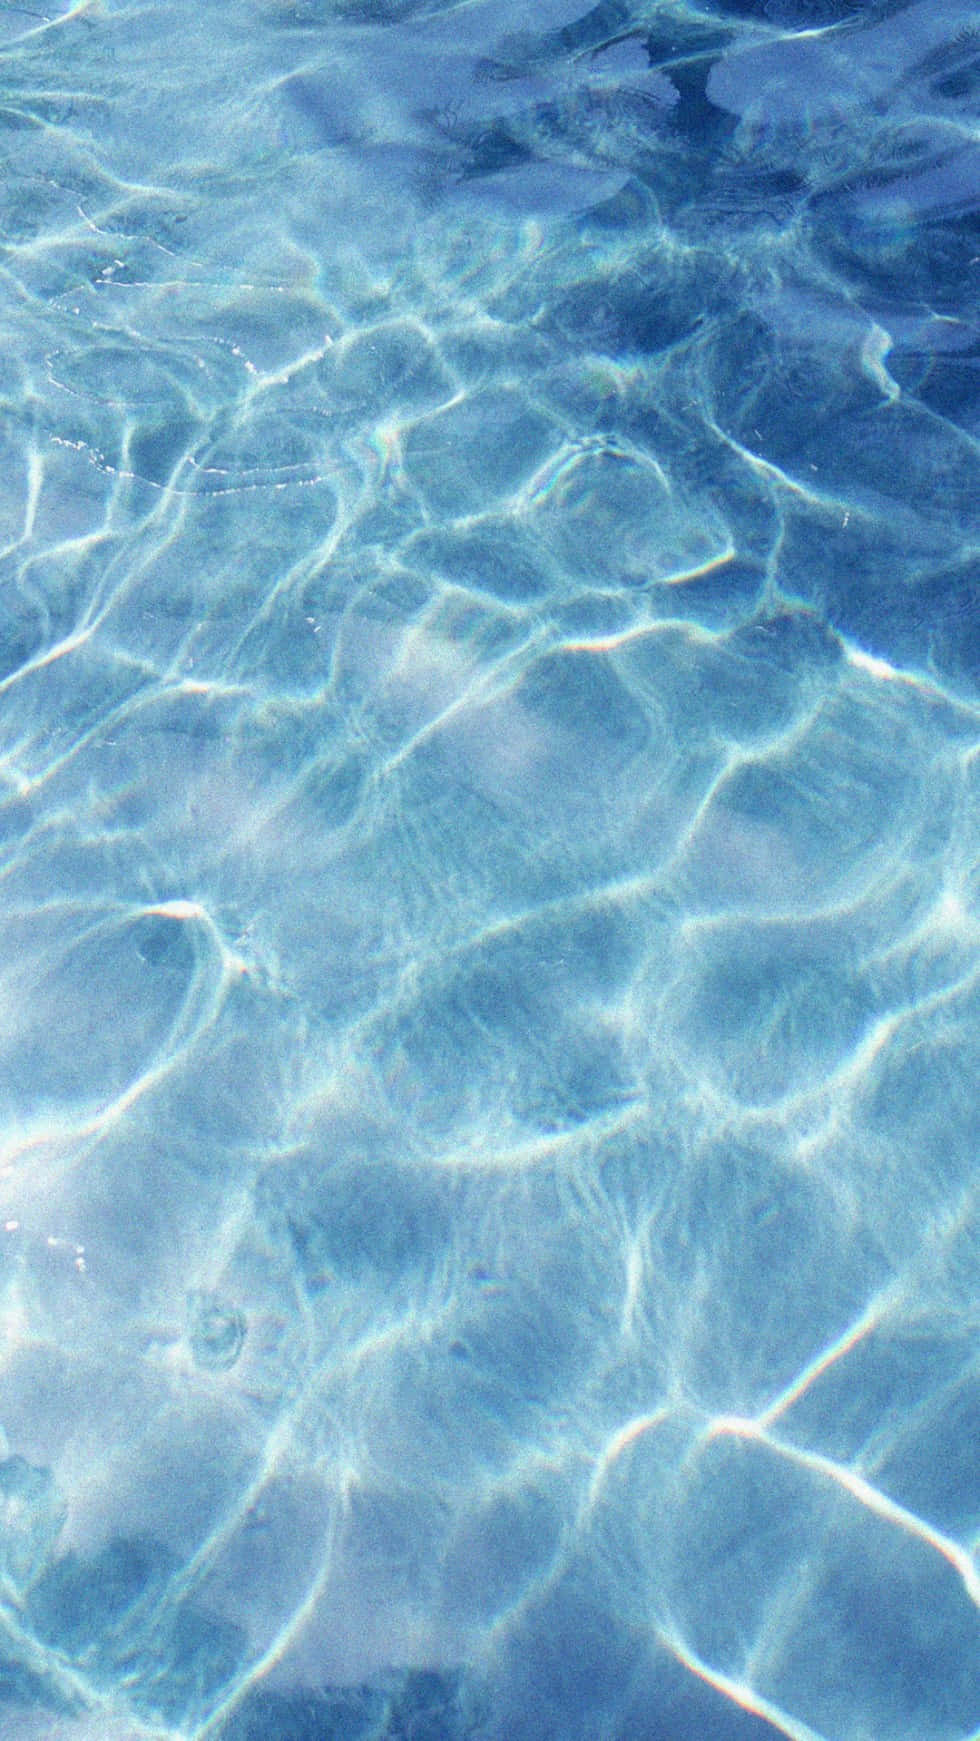 Download Aesthetic Blue Underwater pictures | Wallpapers.com